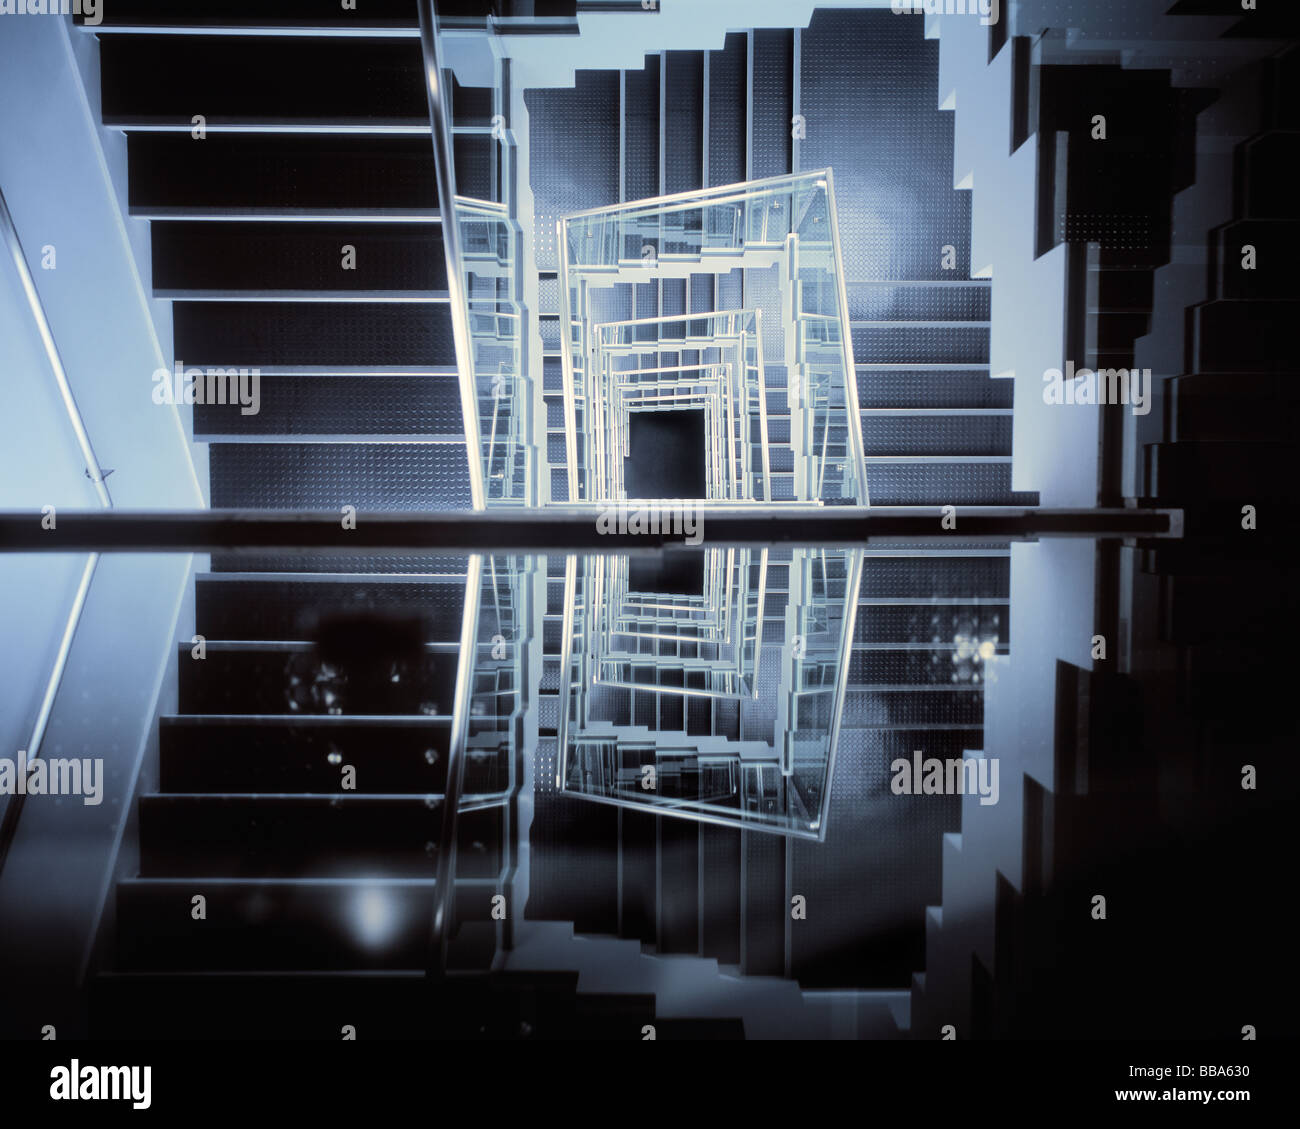 Kaleidoscopic image of stairway and its reflection. Stock Photo